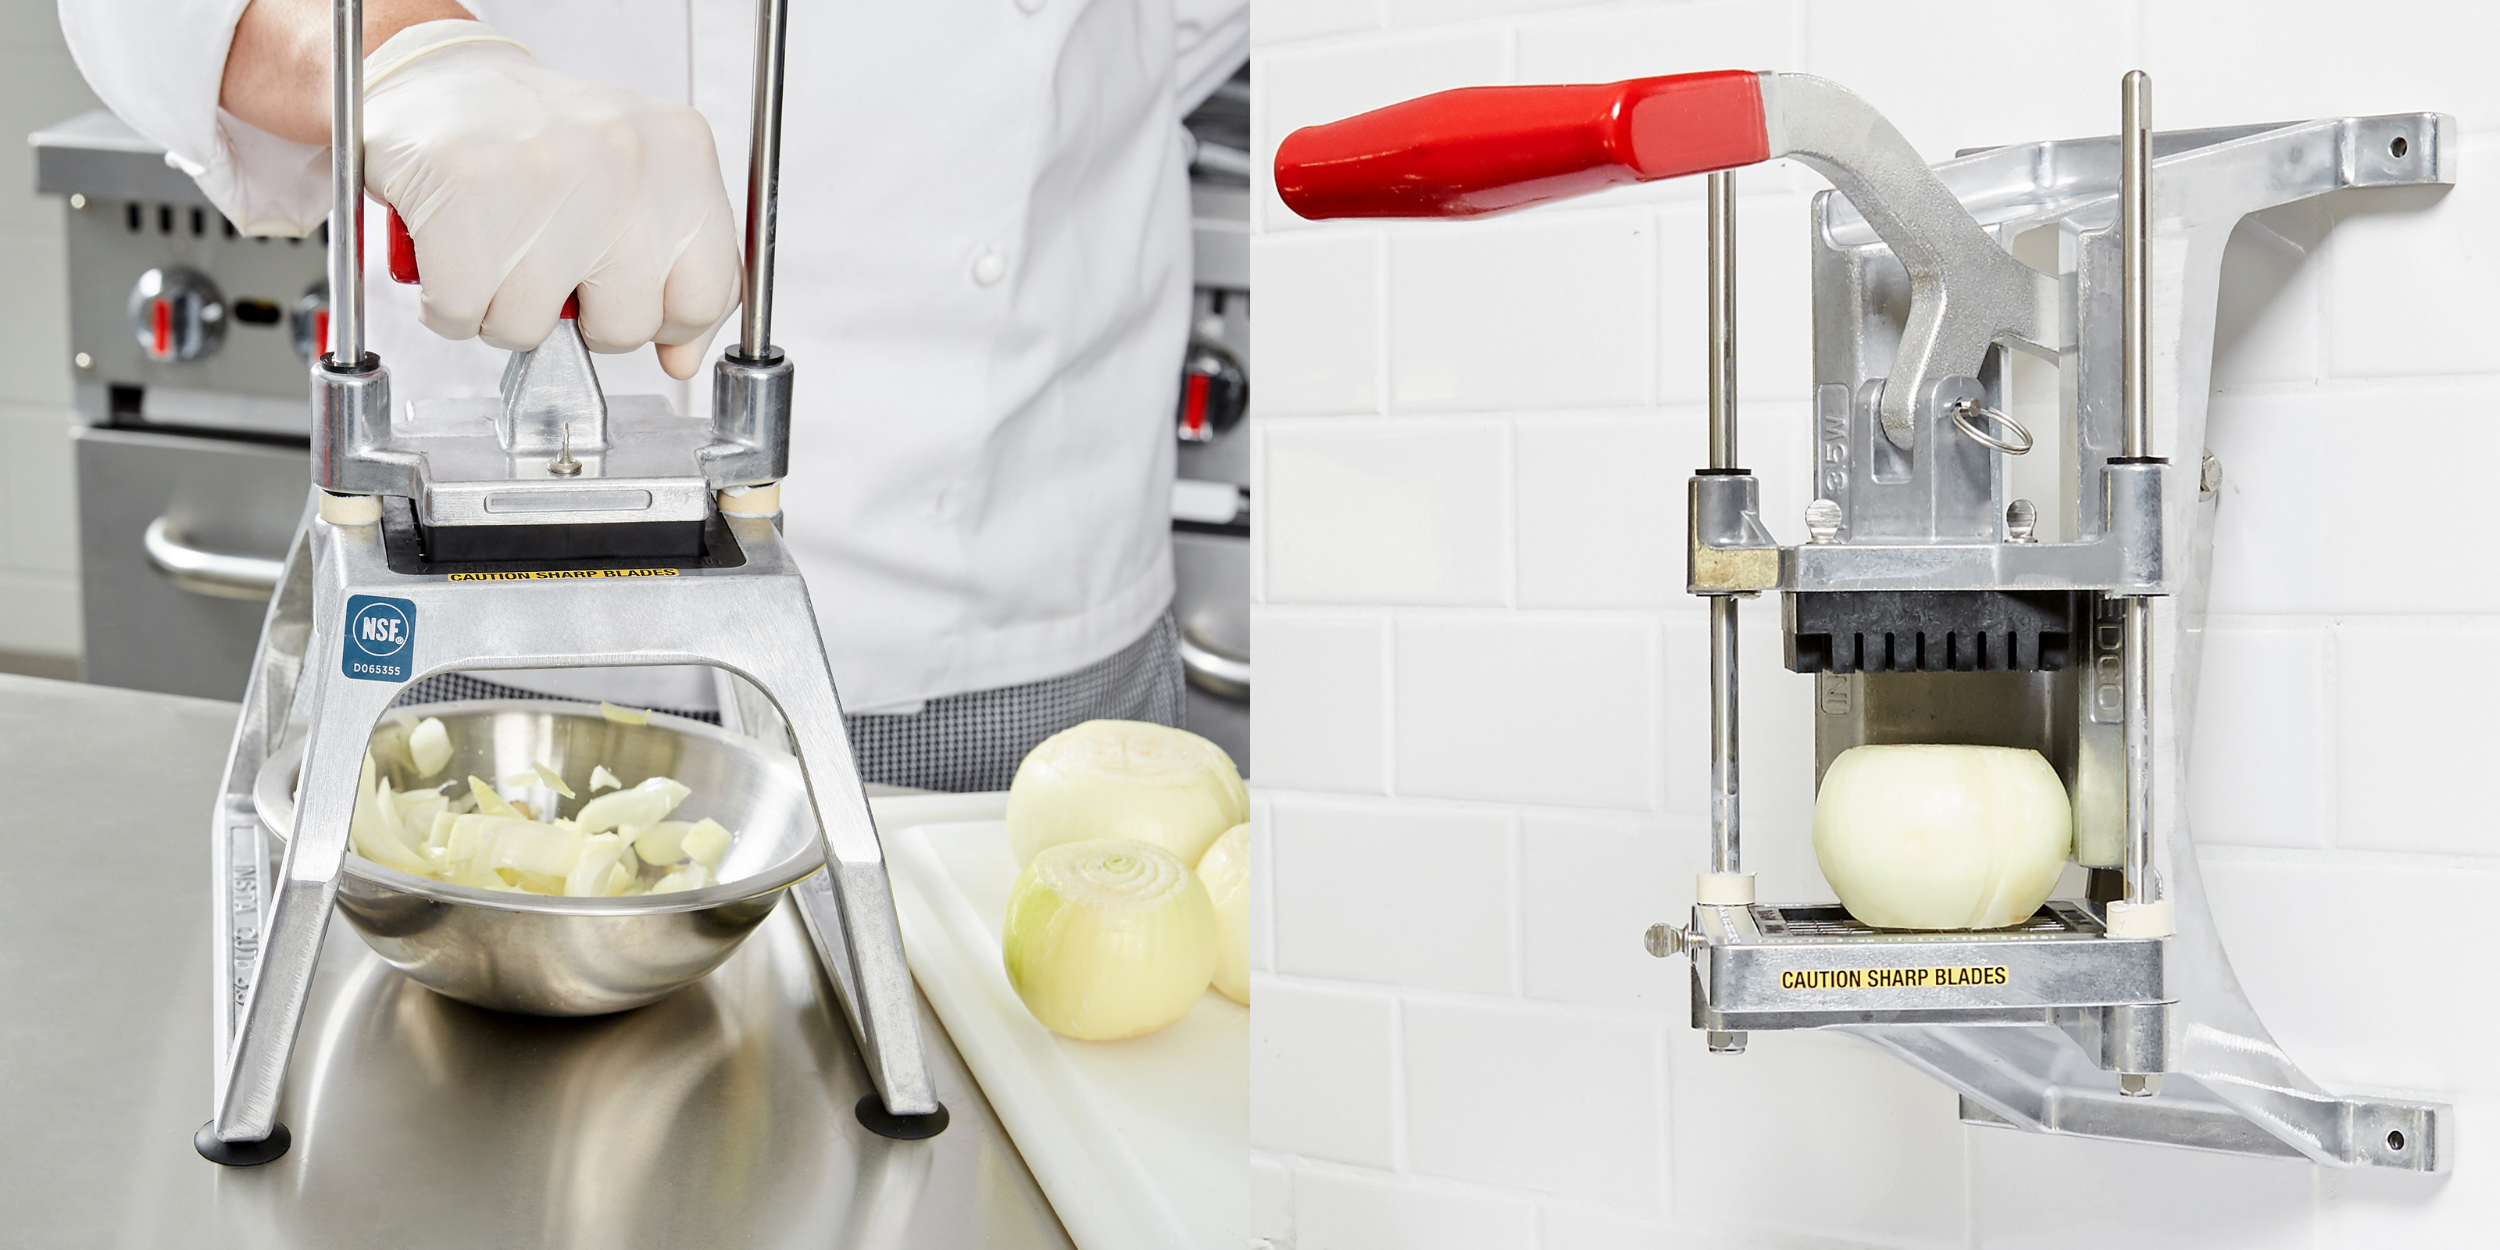 Counter versus wall mounted manual food processors